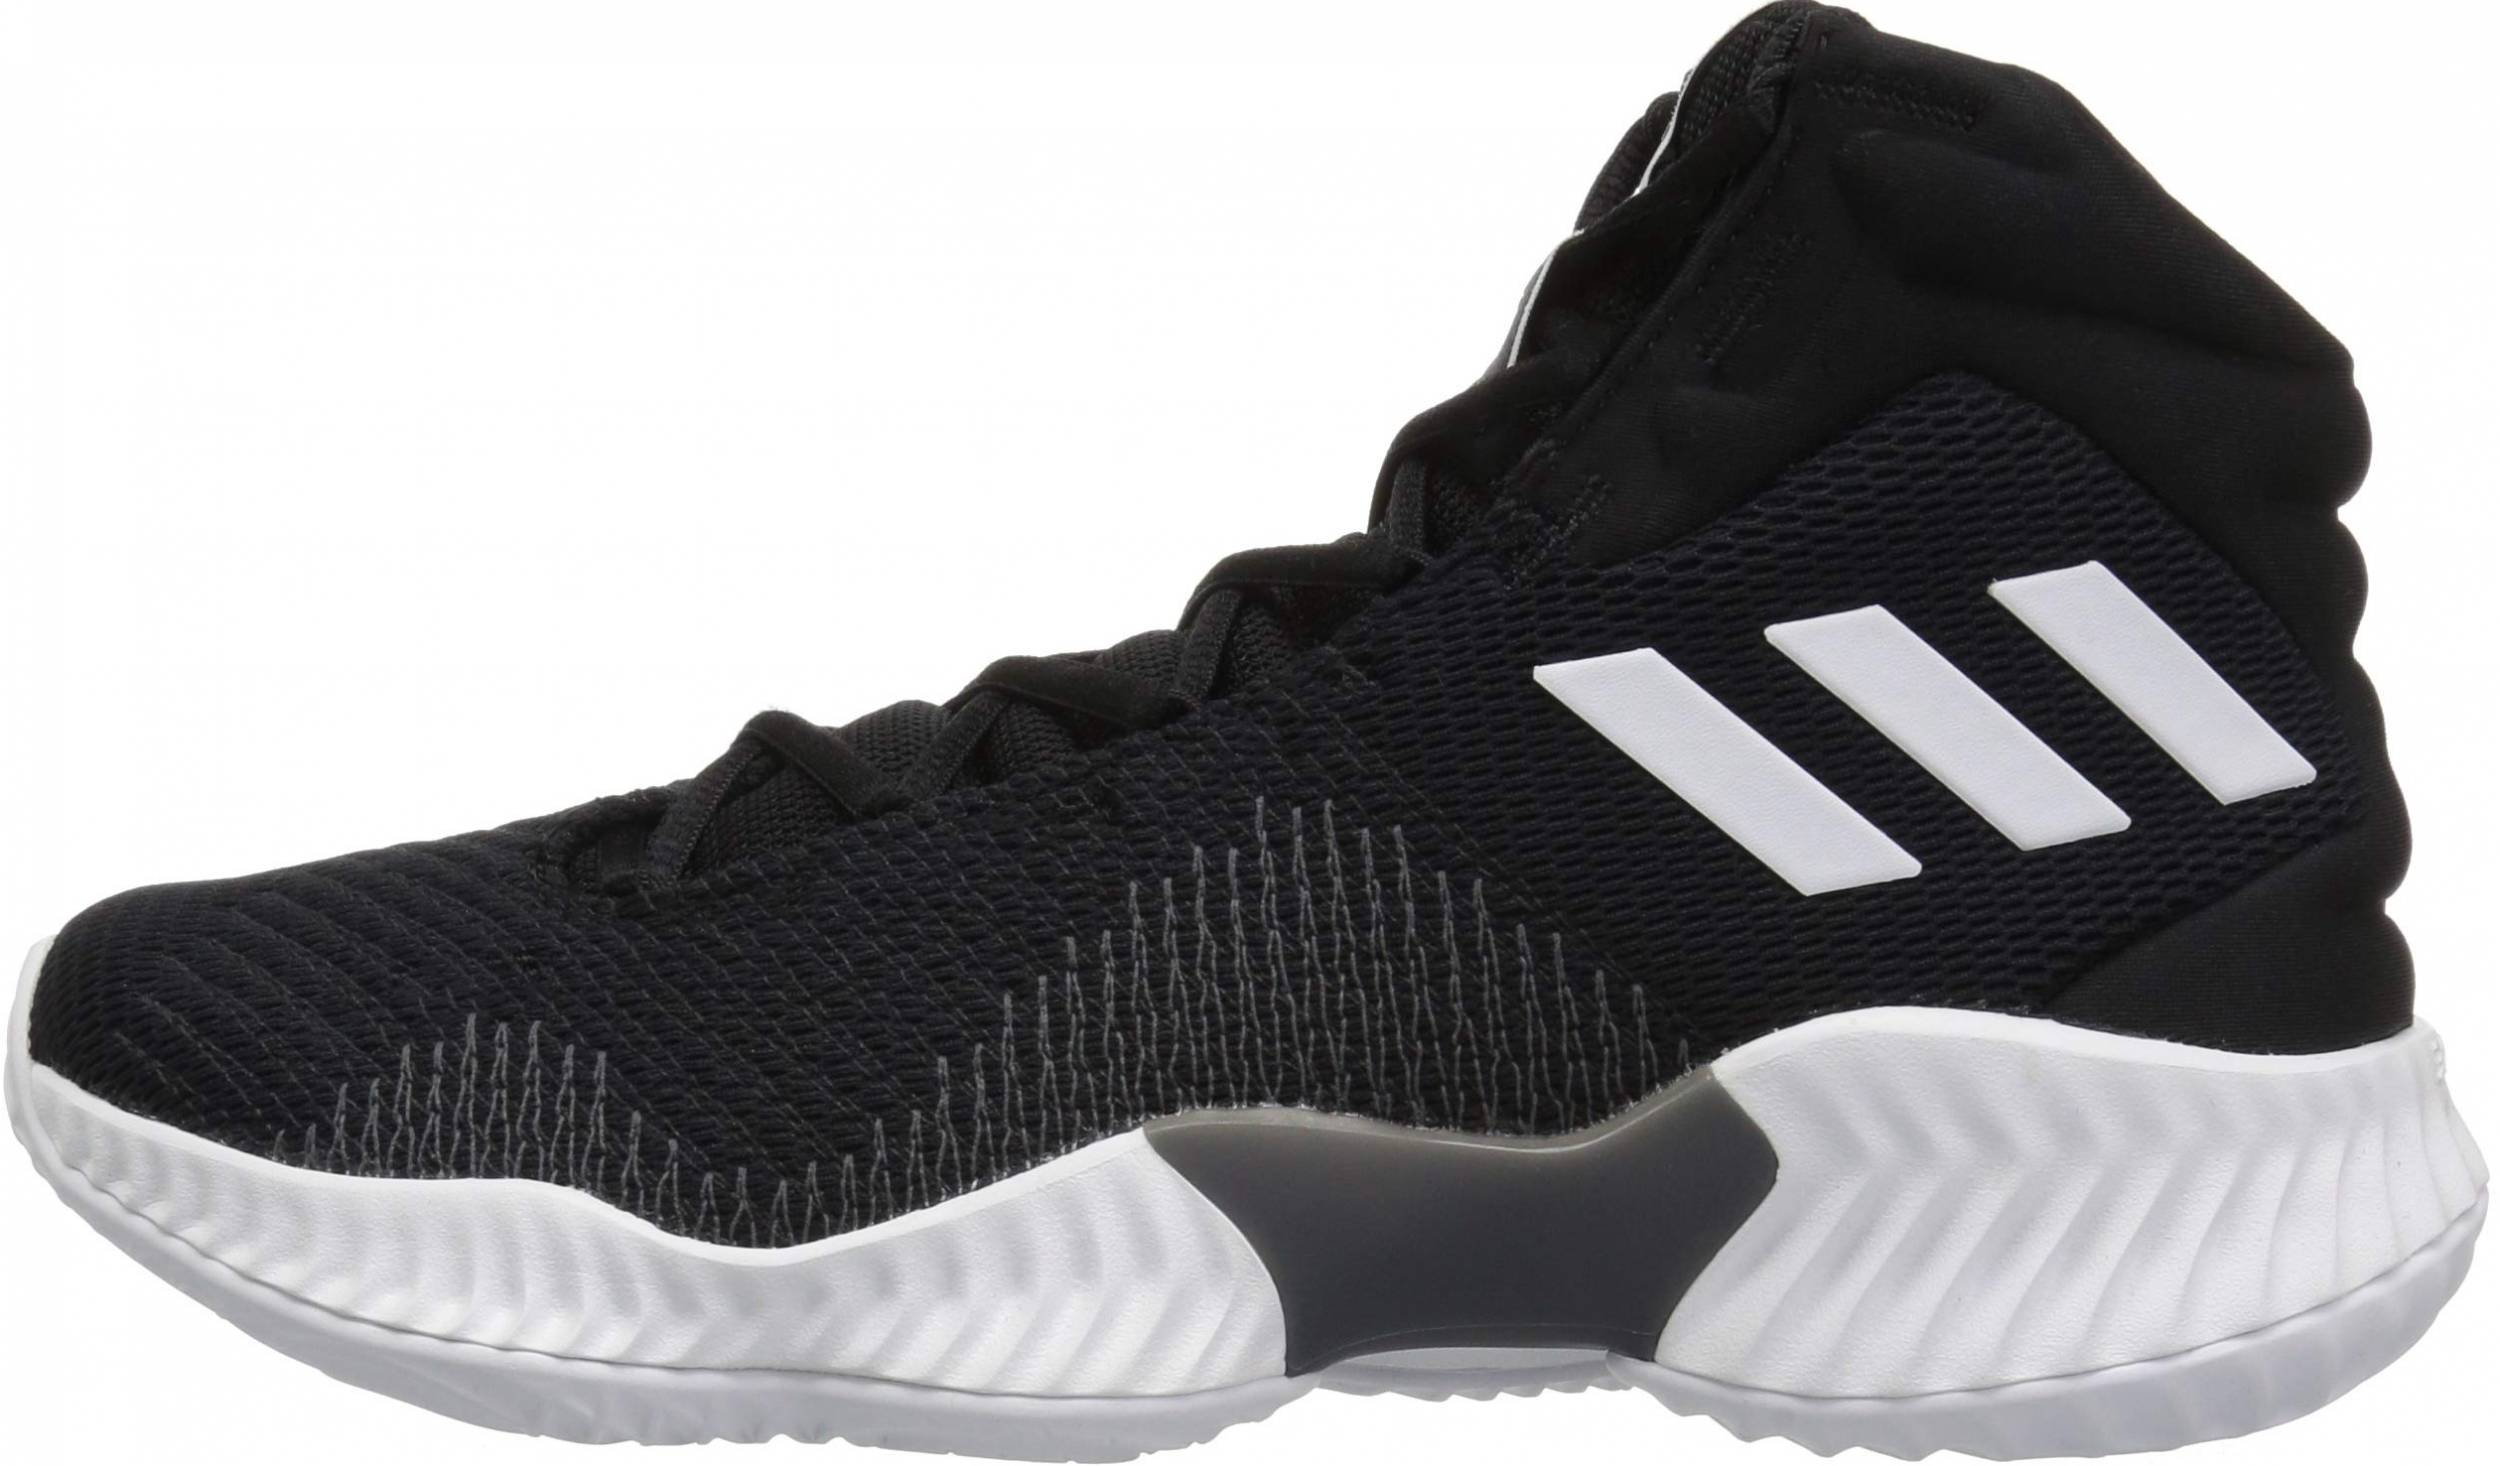 Adidas Mens Basketball Pro Bounce Madness 2019 Shoes (Core Black, White,  Grey) in Bangalore at best price by Sunrise Enterprises - Justdial